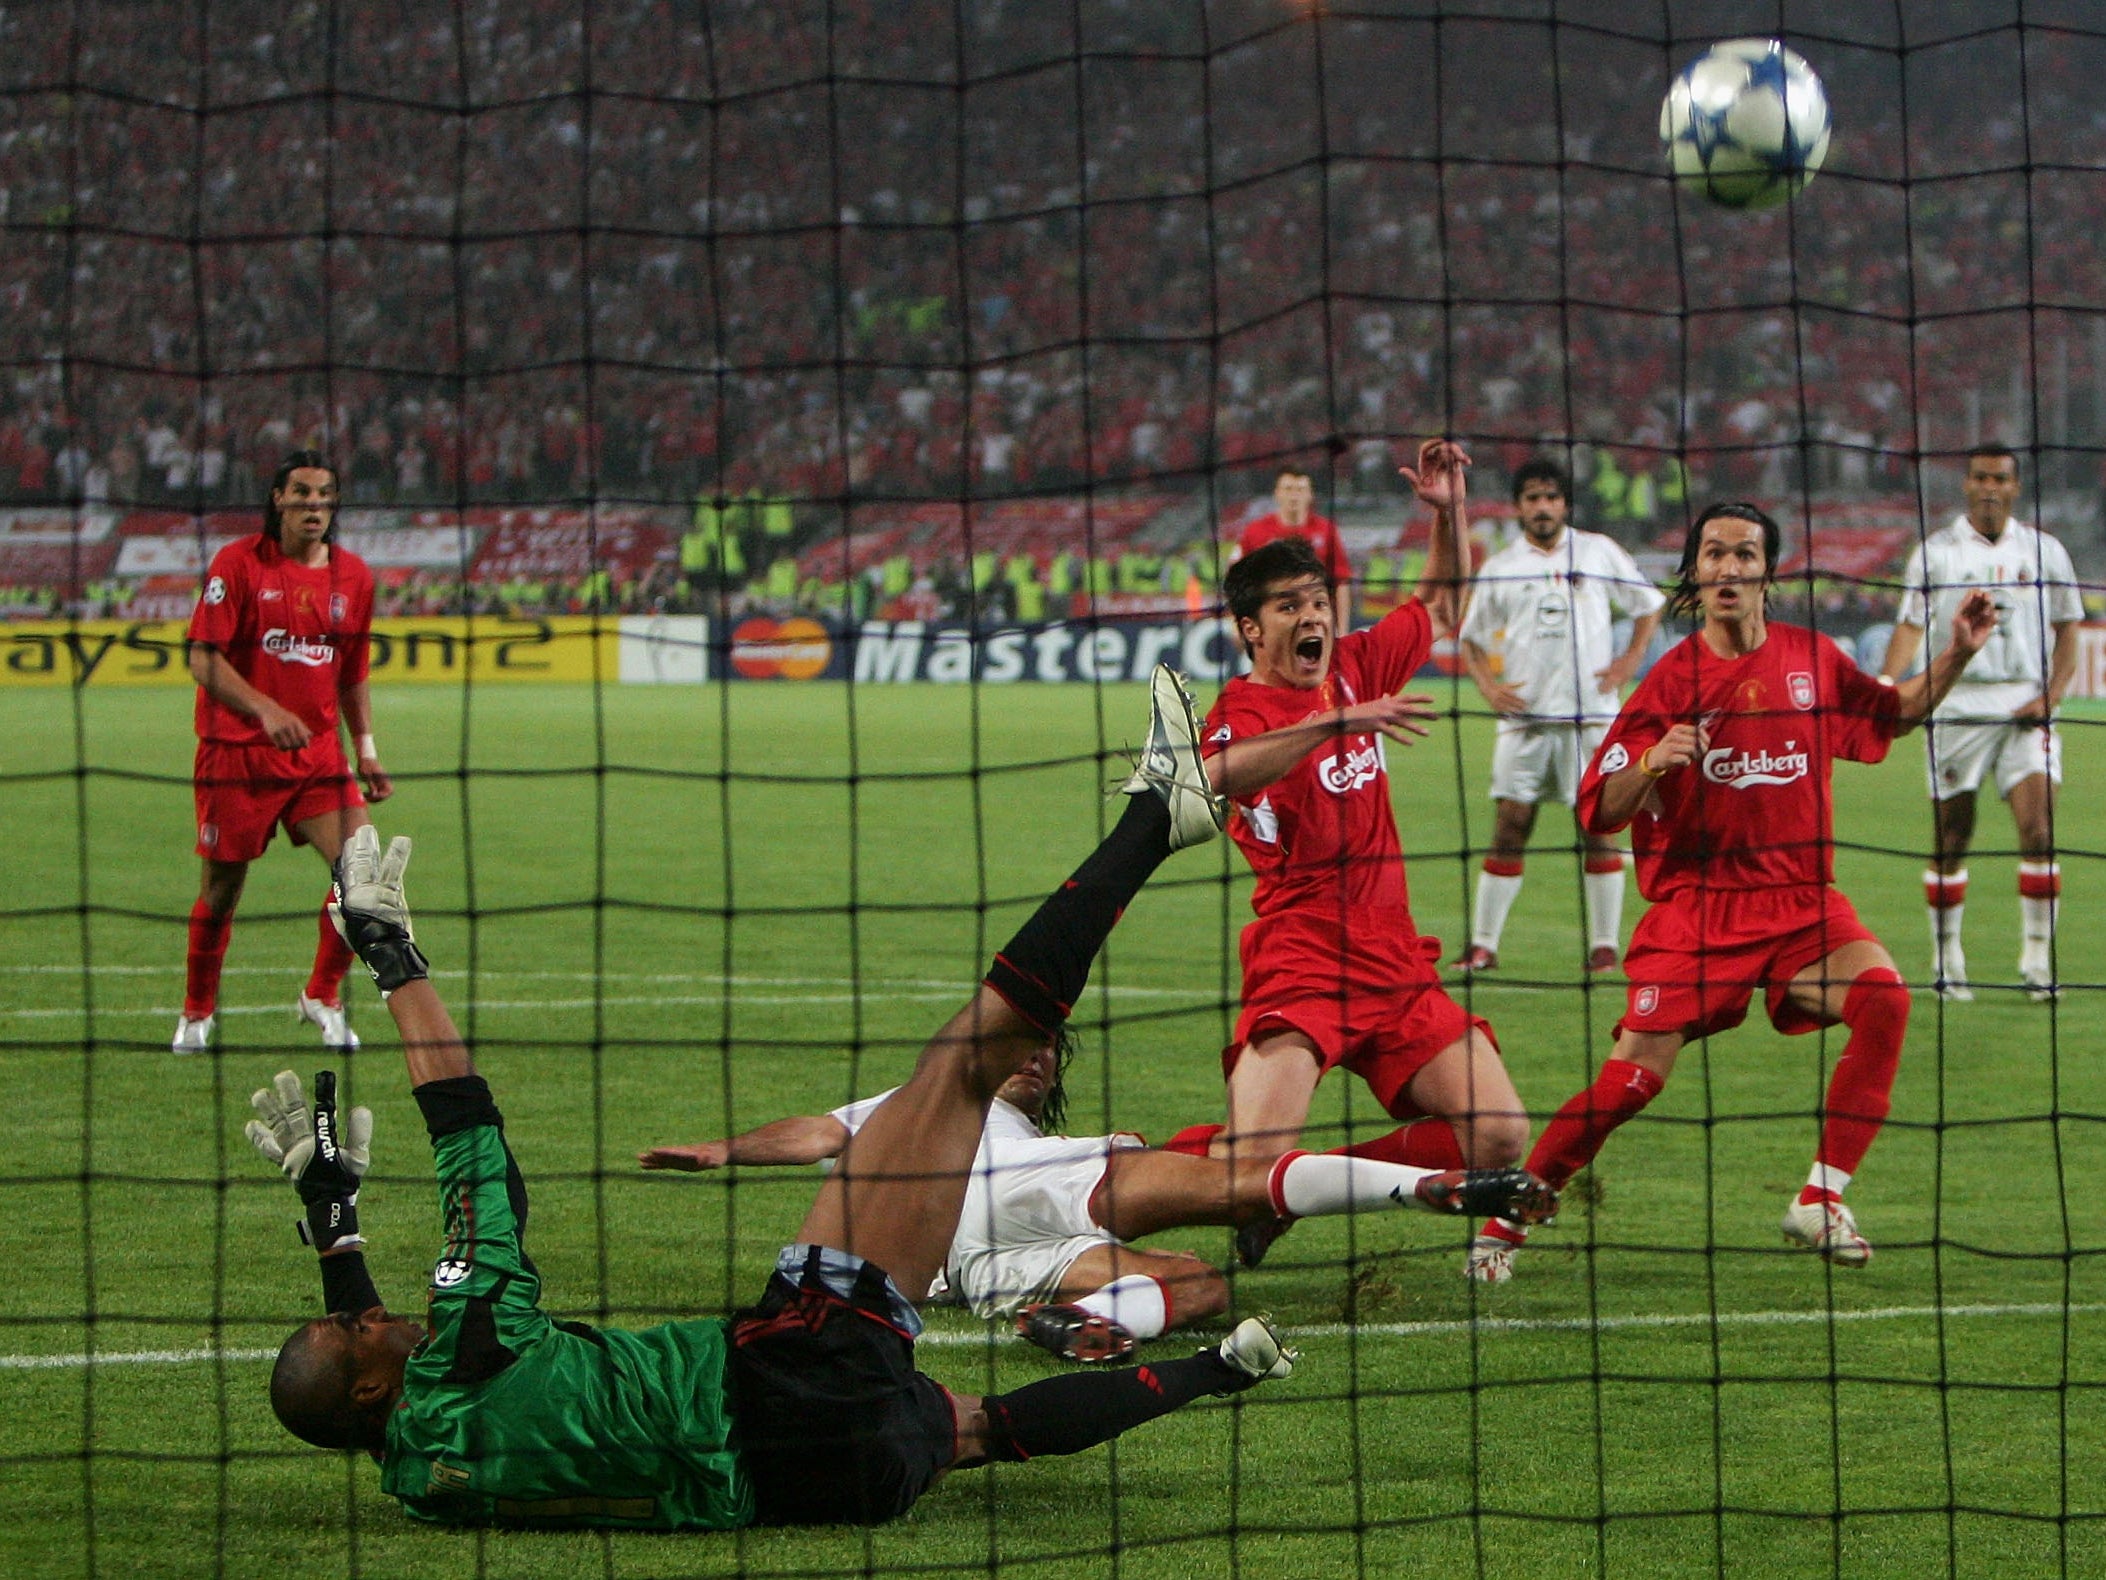 Alonso played a key part in the Miracle of Istanbul